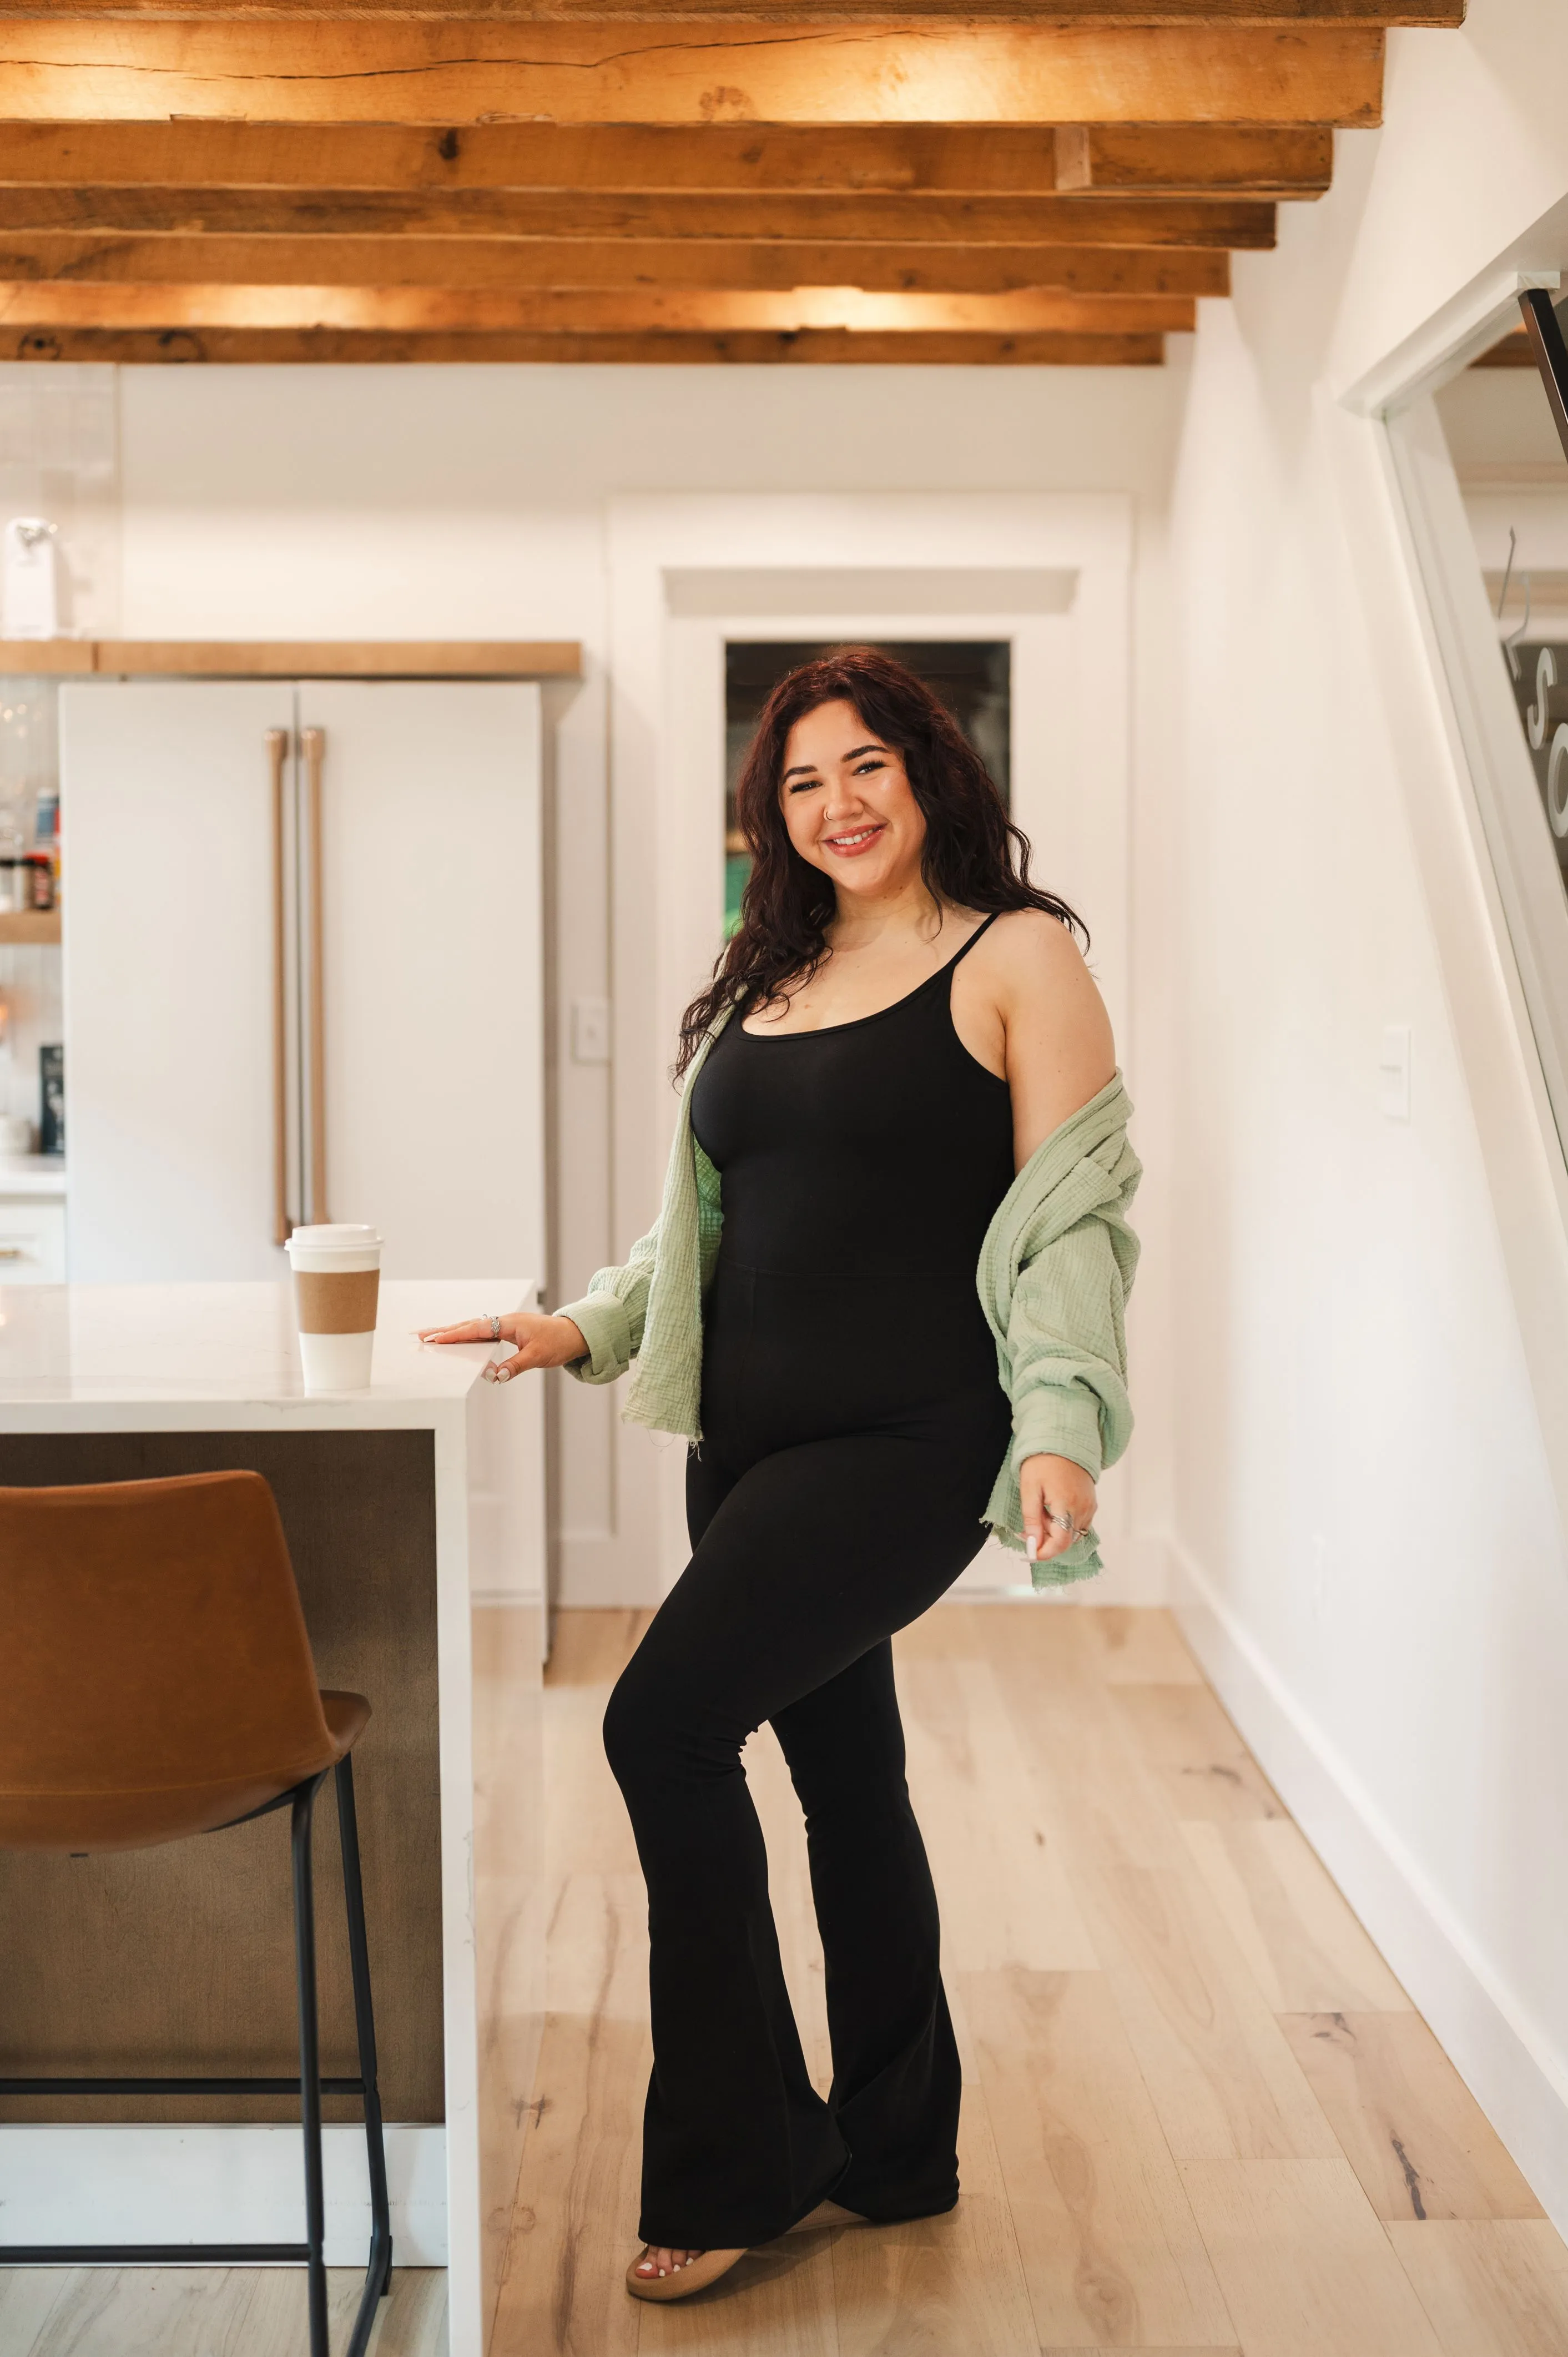 A smiling woman standing in a kitchen, wearing a black outfit with a green cardigan, next to a counter with a coffee cup.